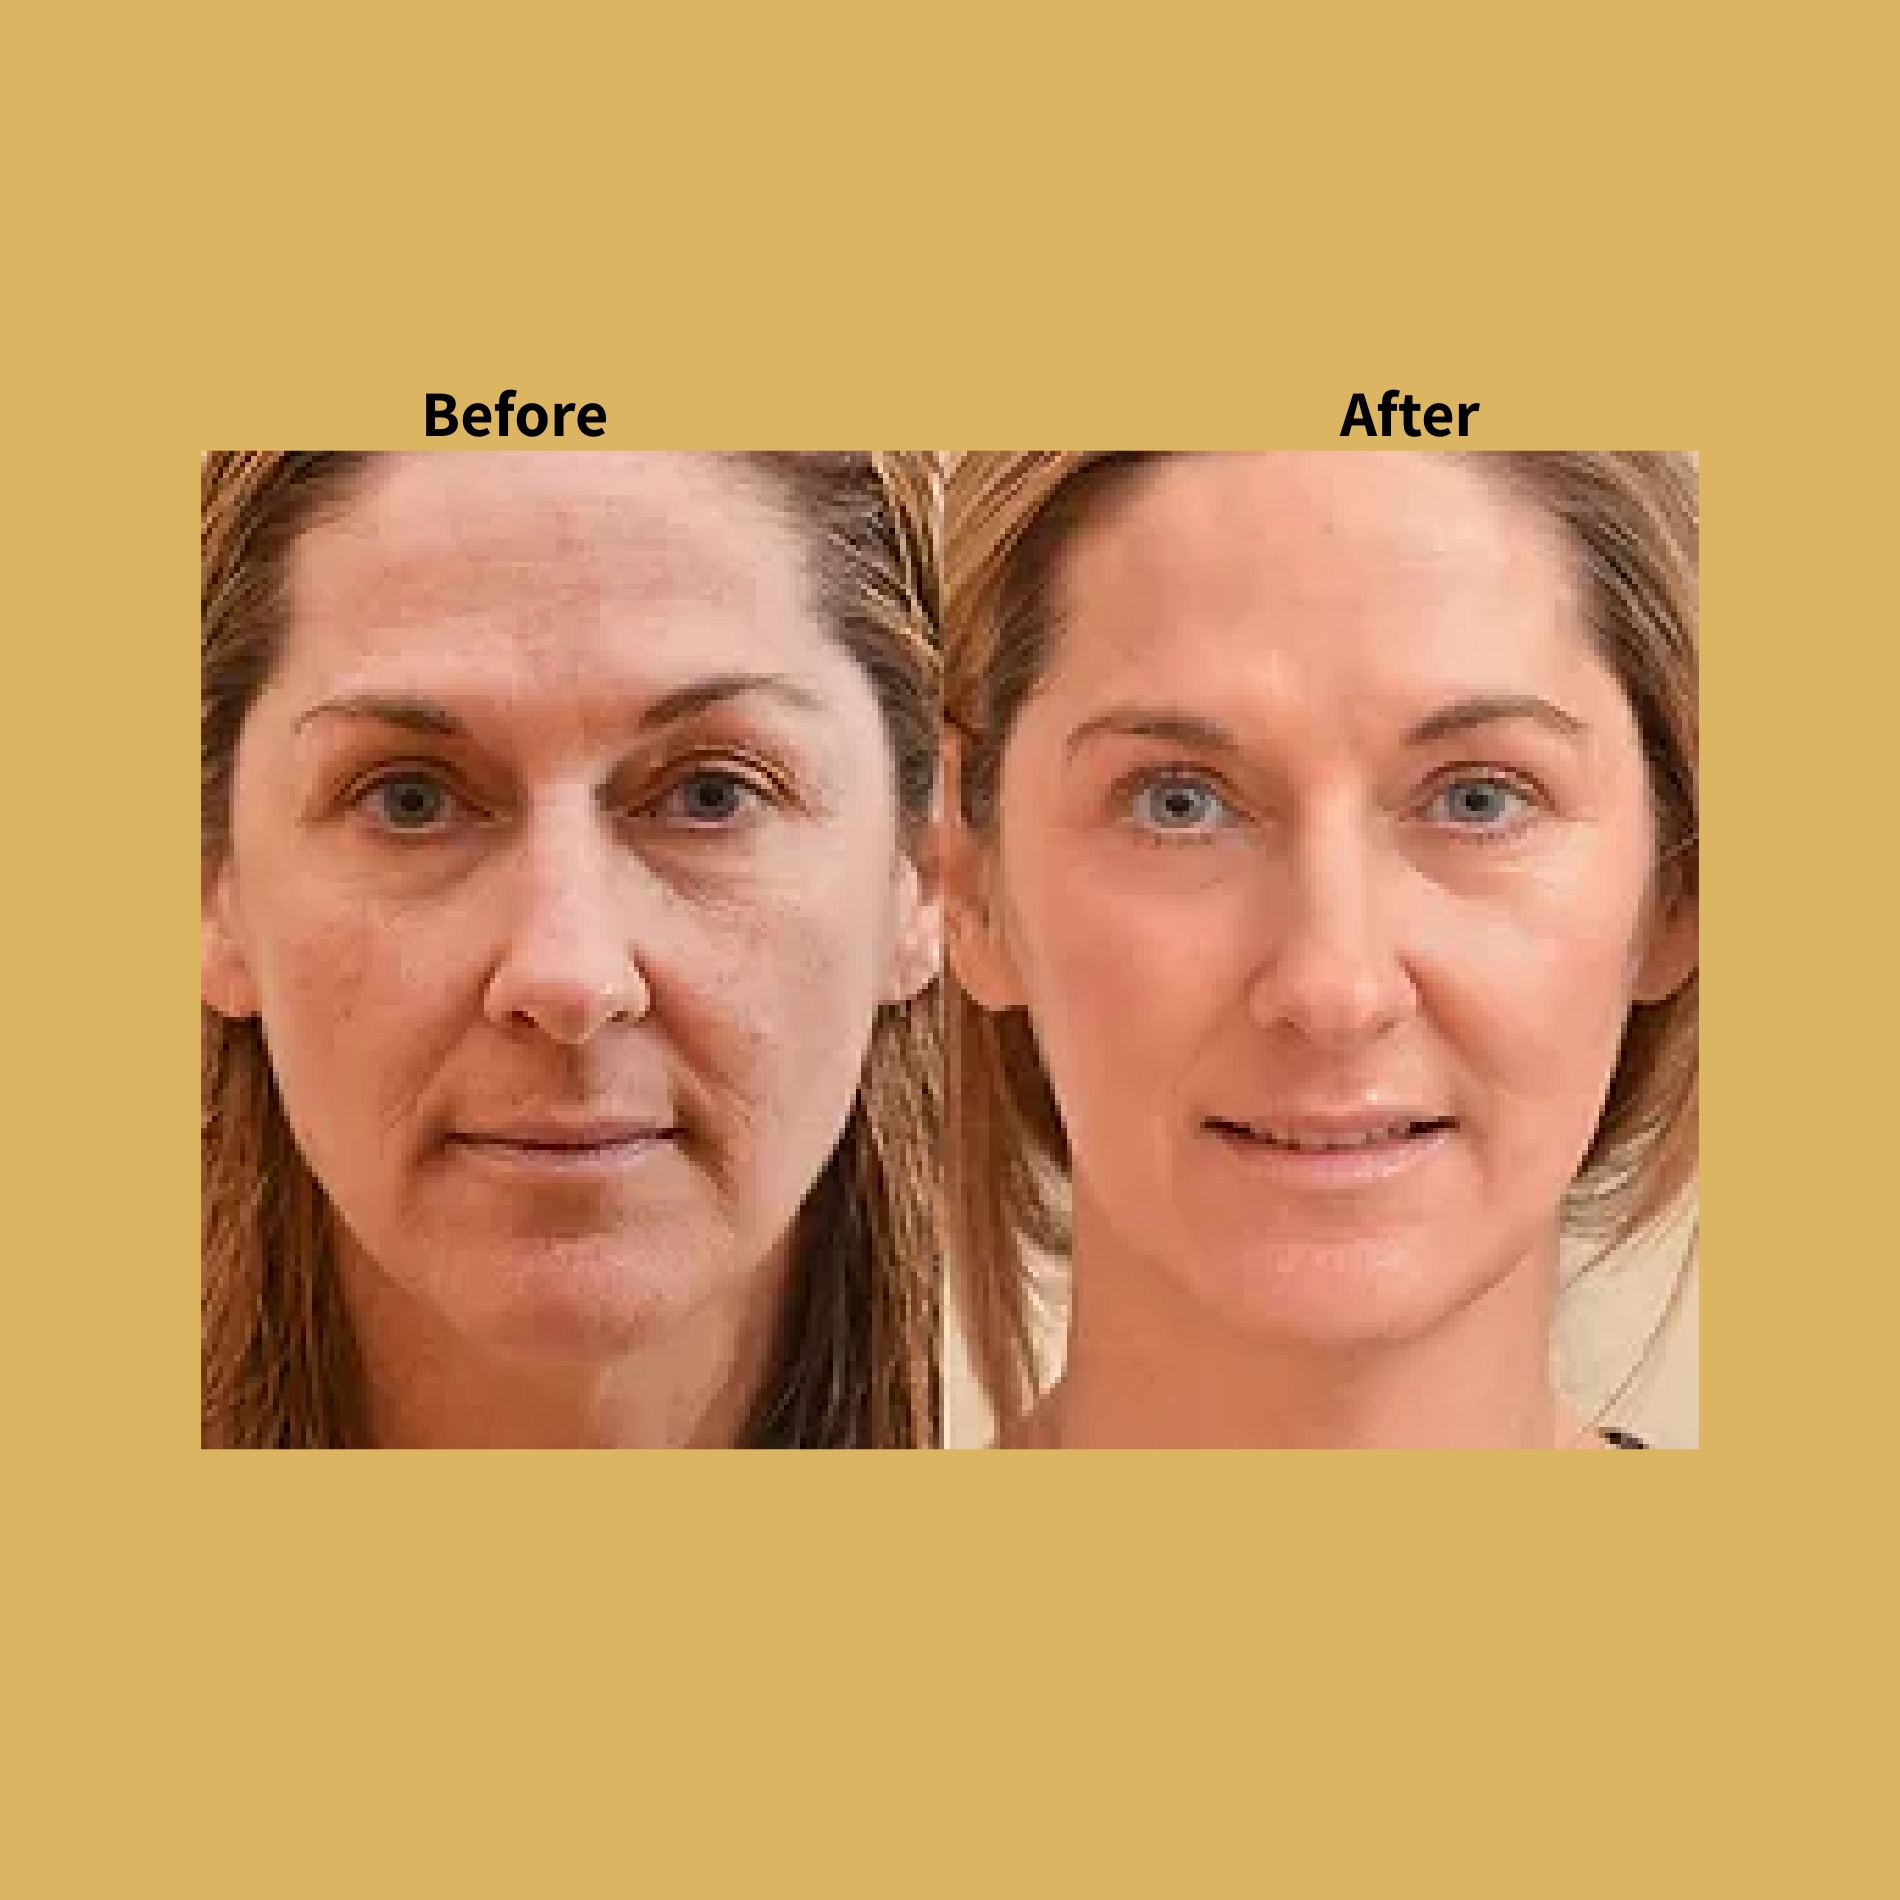 Co2 Fractional Laser Before and After Treatment Photos | Soleil Medical & Beauty Spa in Portland, OR